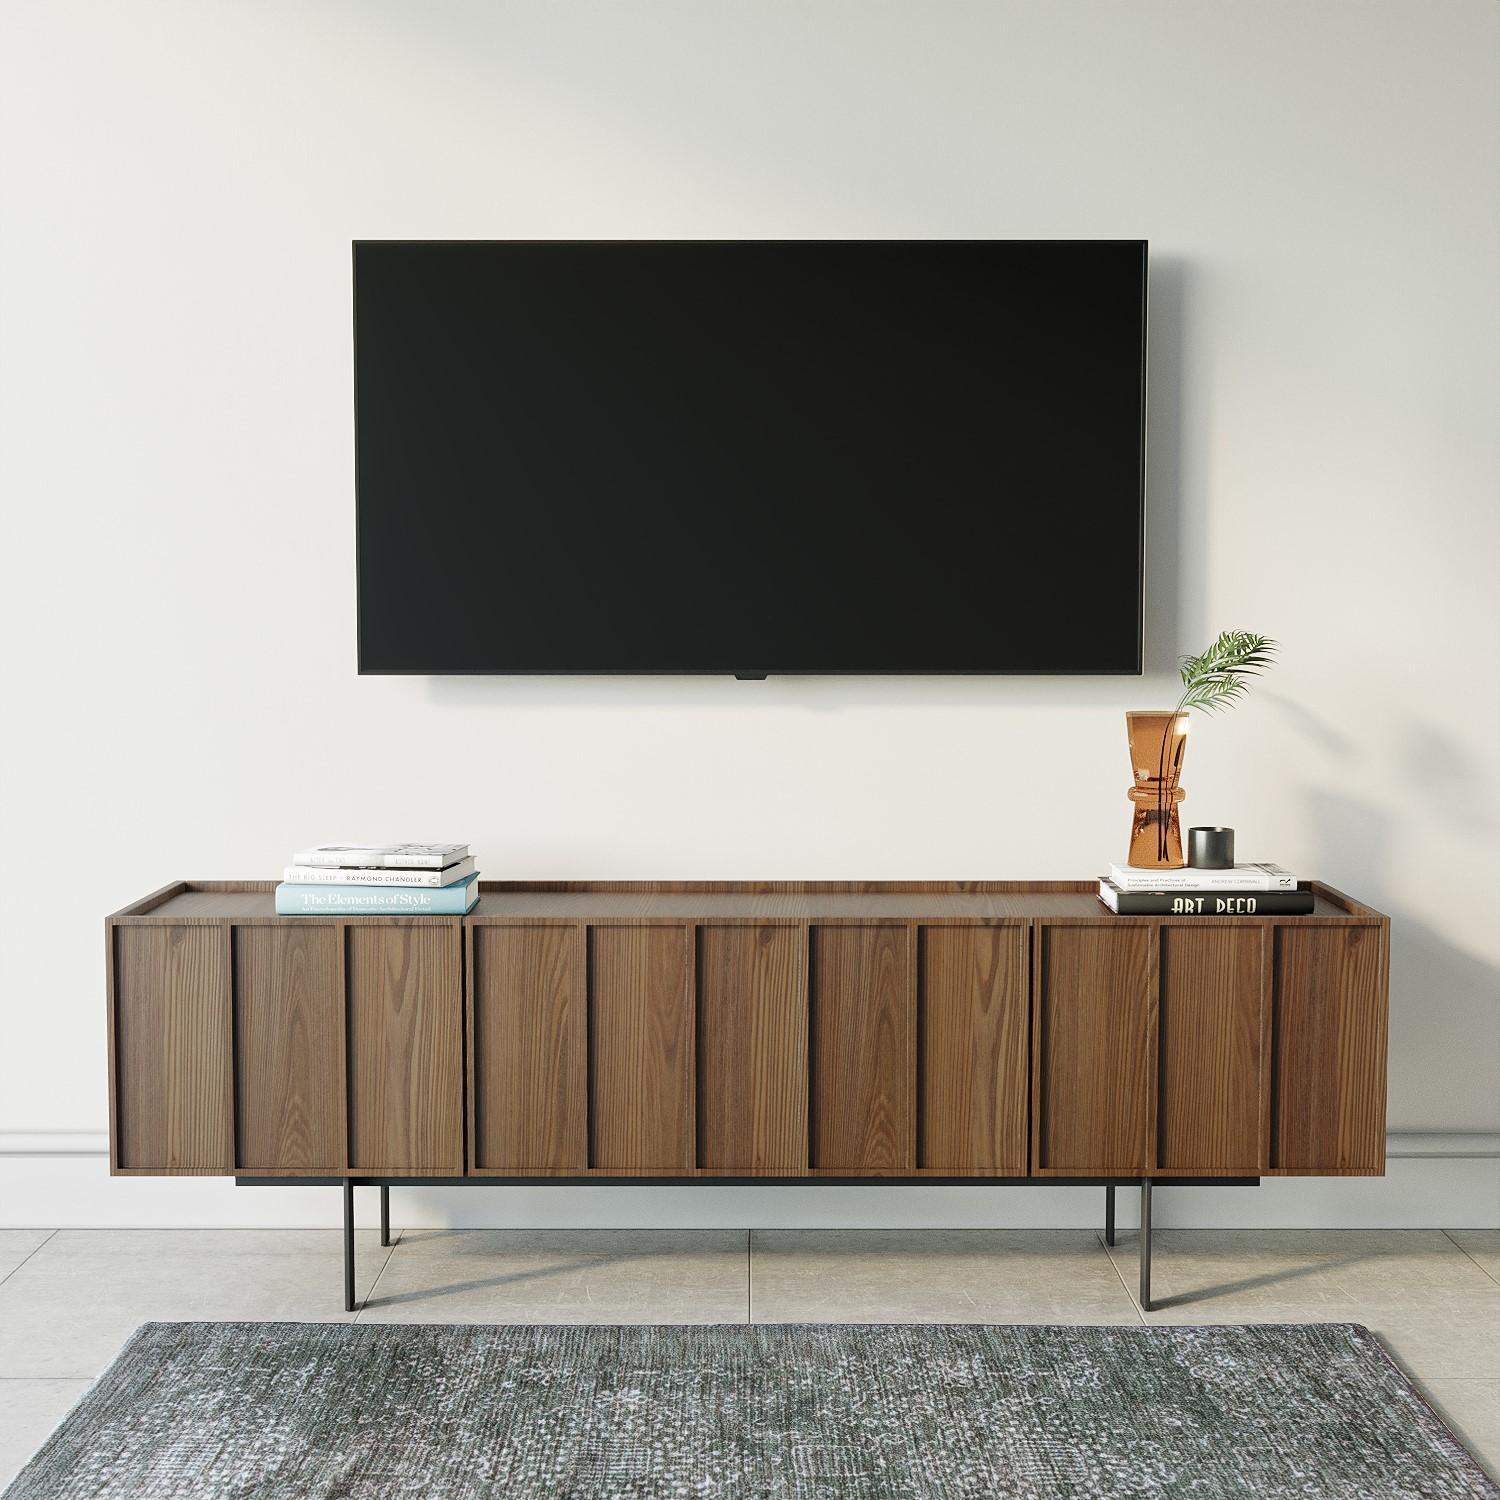 Read more about Wide walnut tv stand with storage tvs up to 70 helmer